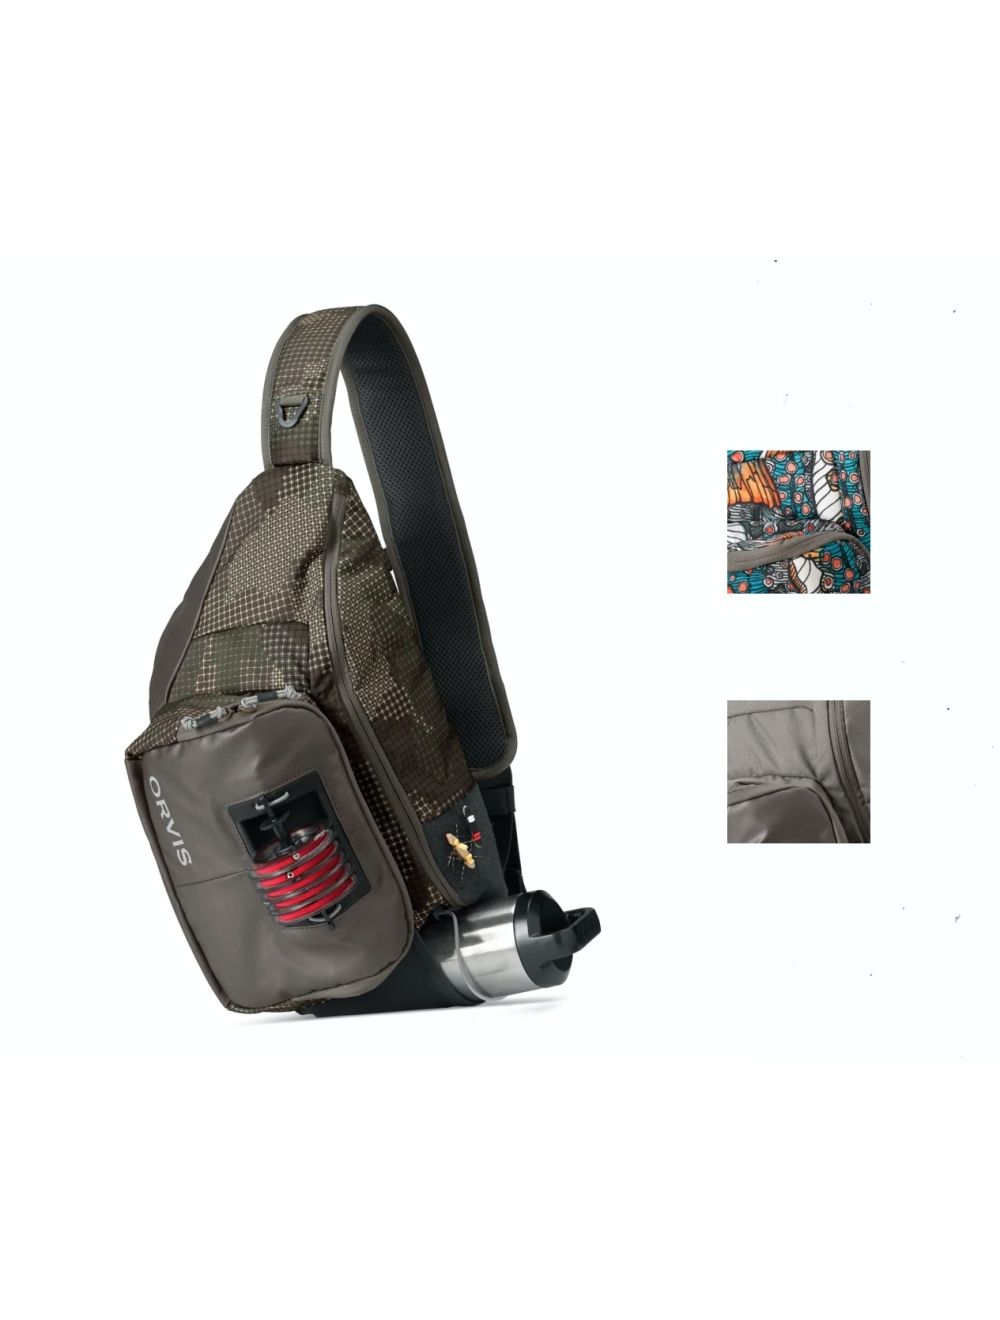 Orvis Guide Sling pack - The perfect pack for any fly fisherman | orvis